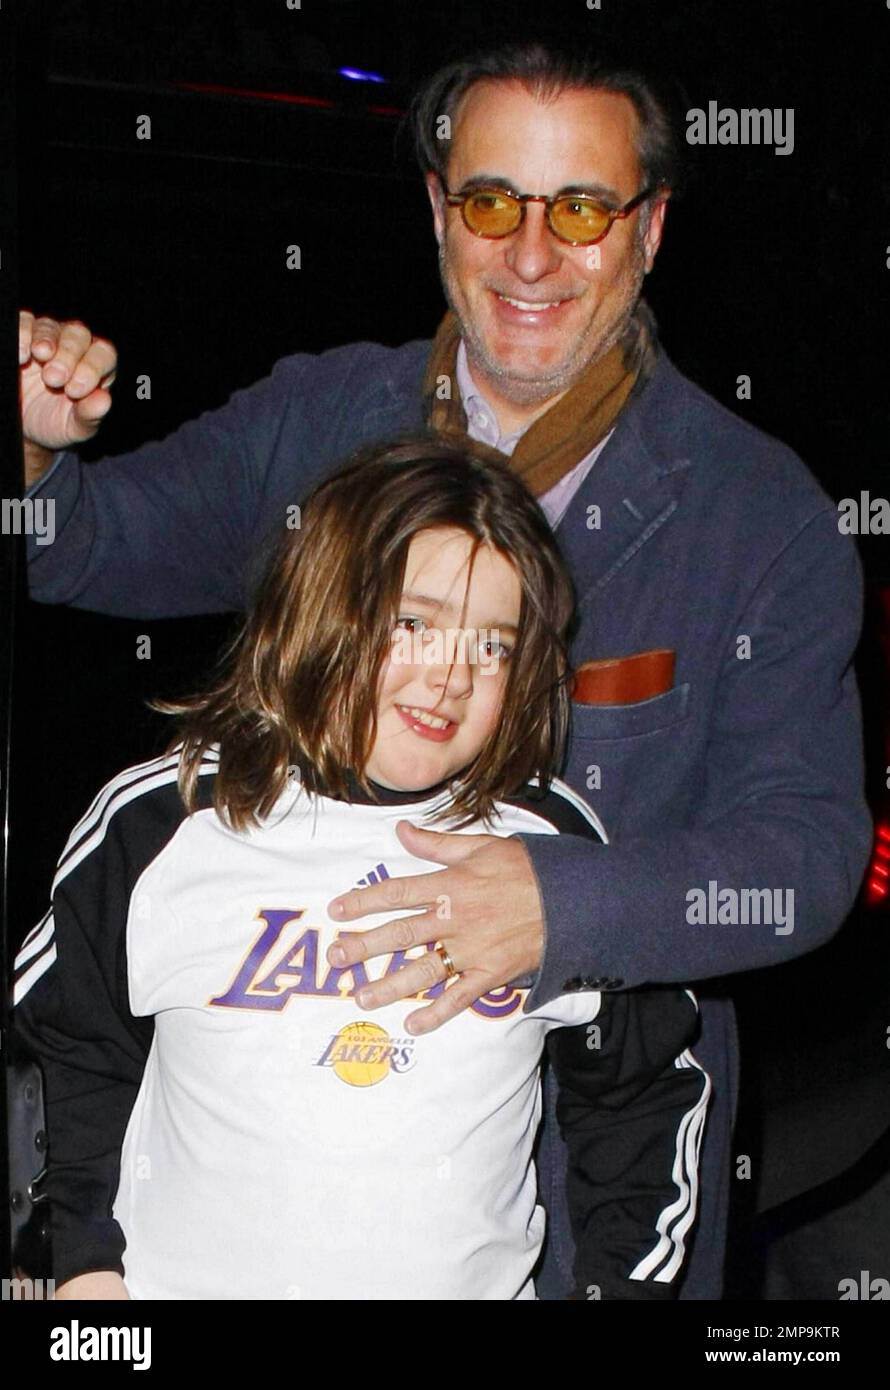 Andy Gardia and son Andres, 8, arrive in an SUV at the Staples Center to watch the LA Lakers vs. Houston Rockets basketball game.  Andy protectively held Andres, who wore a Lakers shirt, close as they smiled and made their way inside where they watched the Lakers beat the Rockets 114-106.   Los Angeles, CA. 02/01/11. Stock Photo